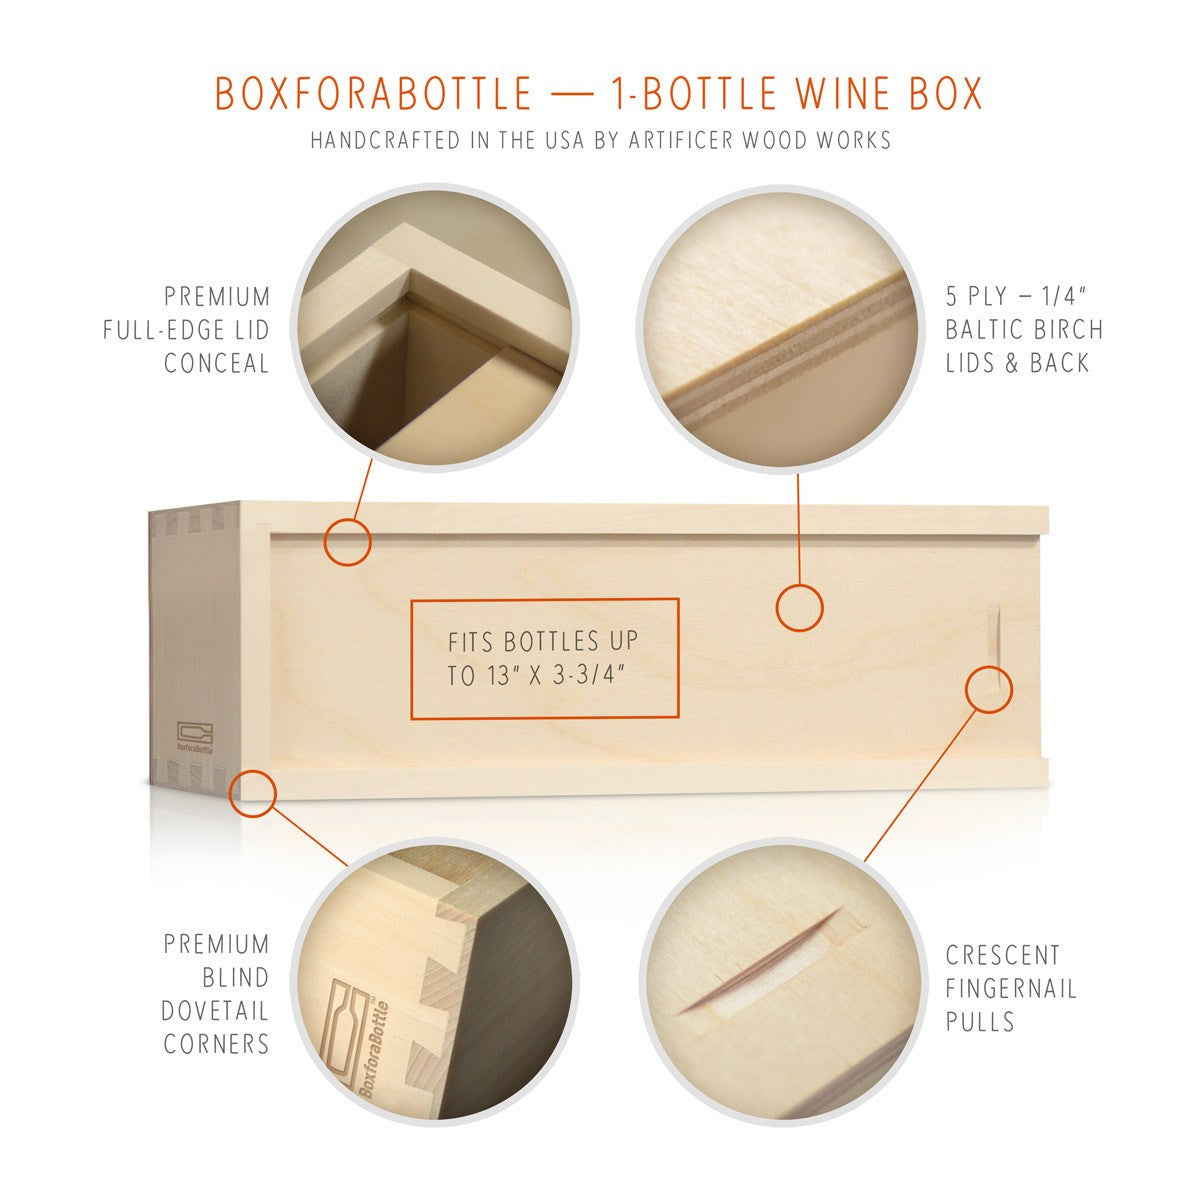 Eat Drink Be Merry - Holiday Wine Box